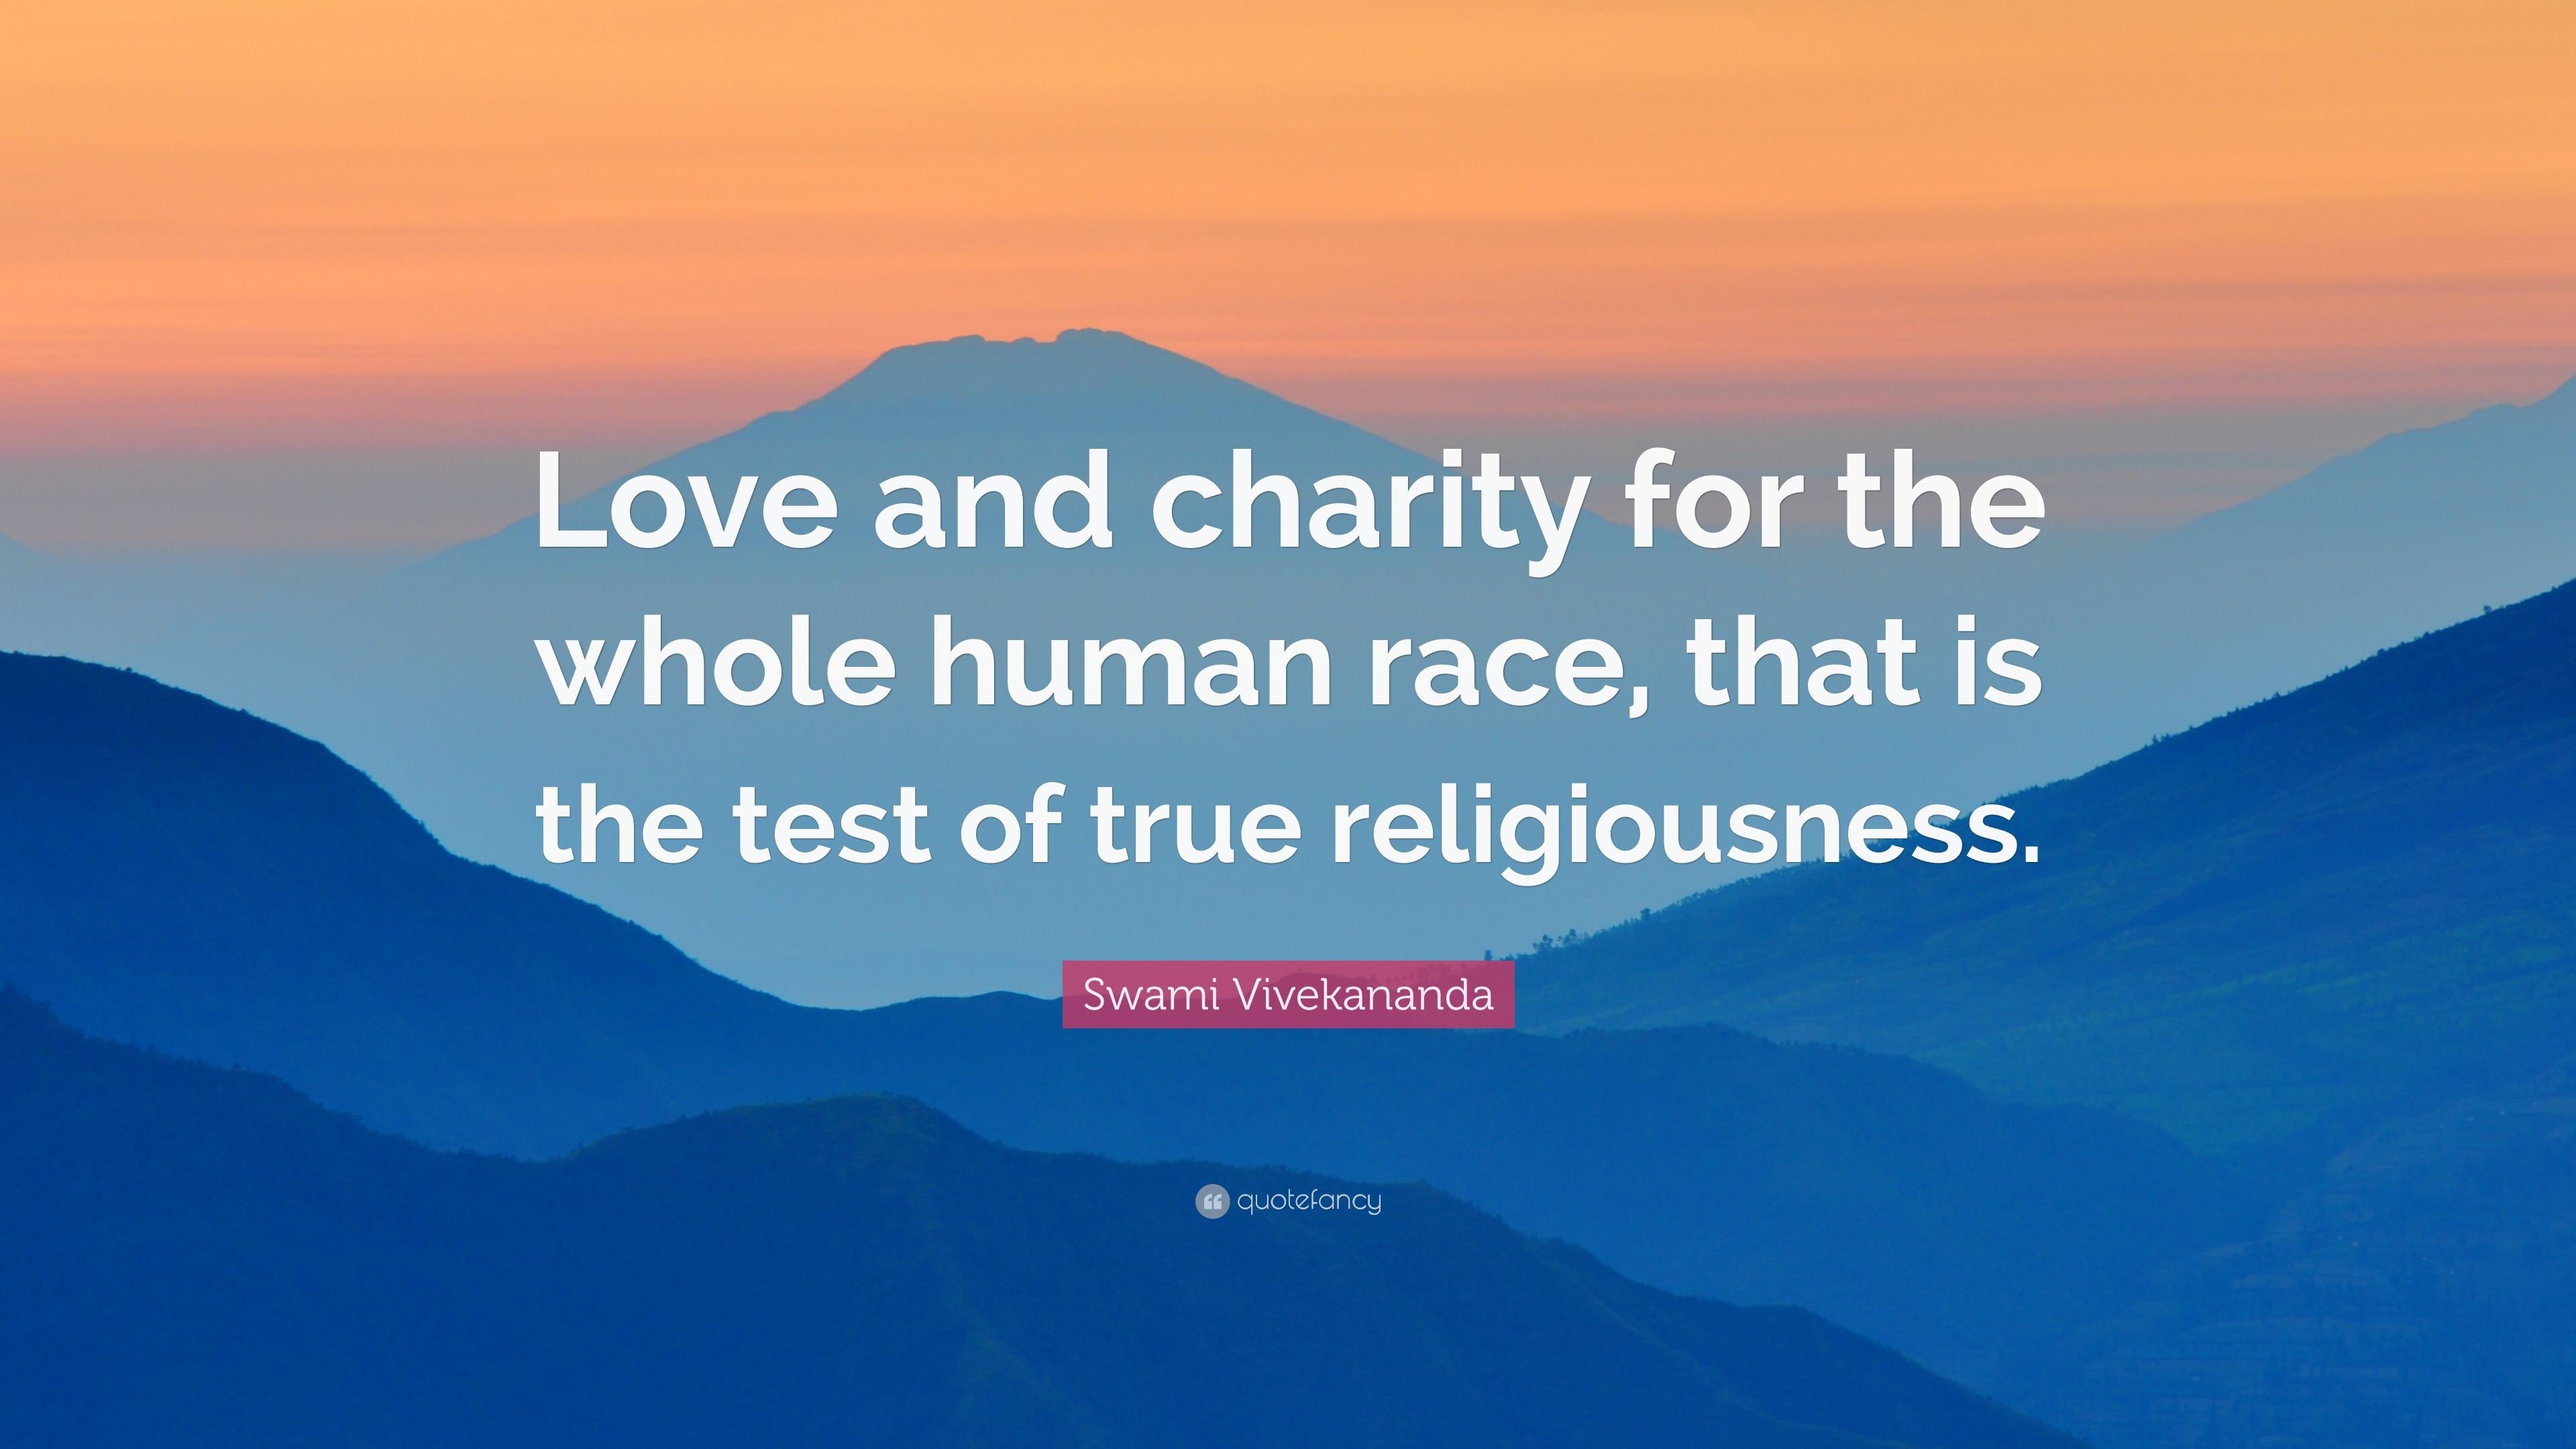 Swami Vivekananda Quote “Love and charity for the whole human race that is